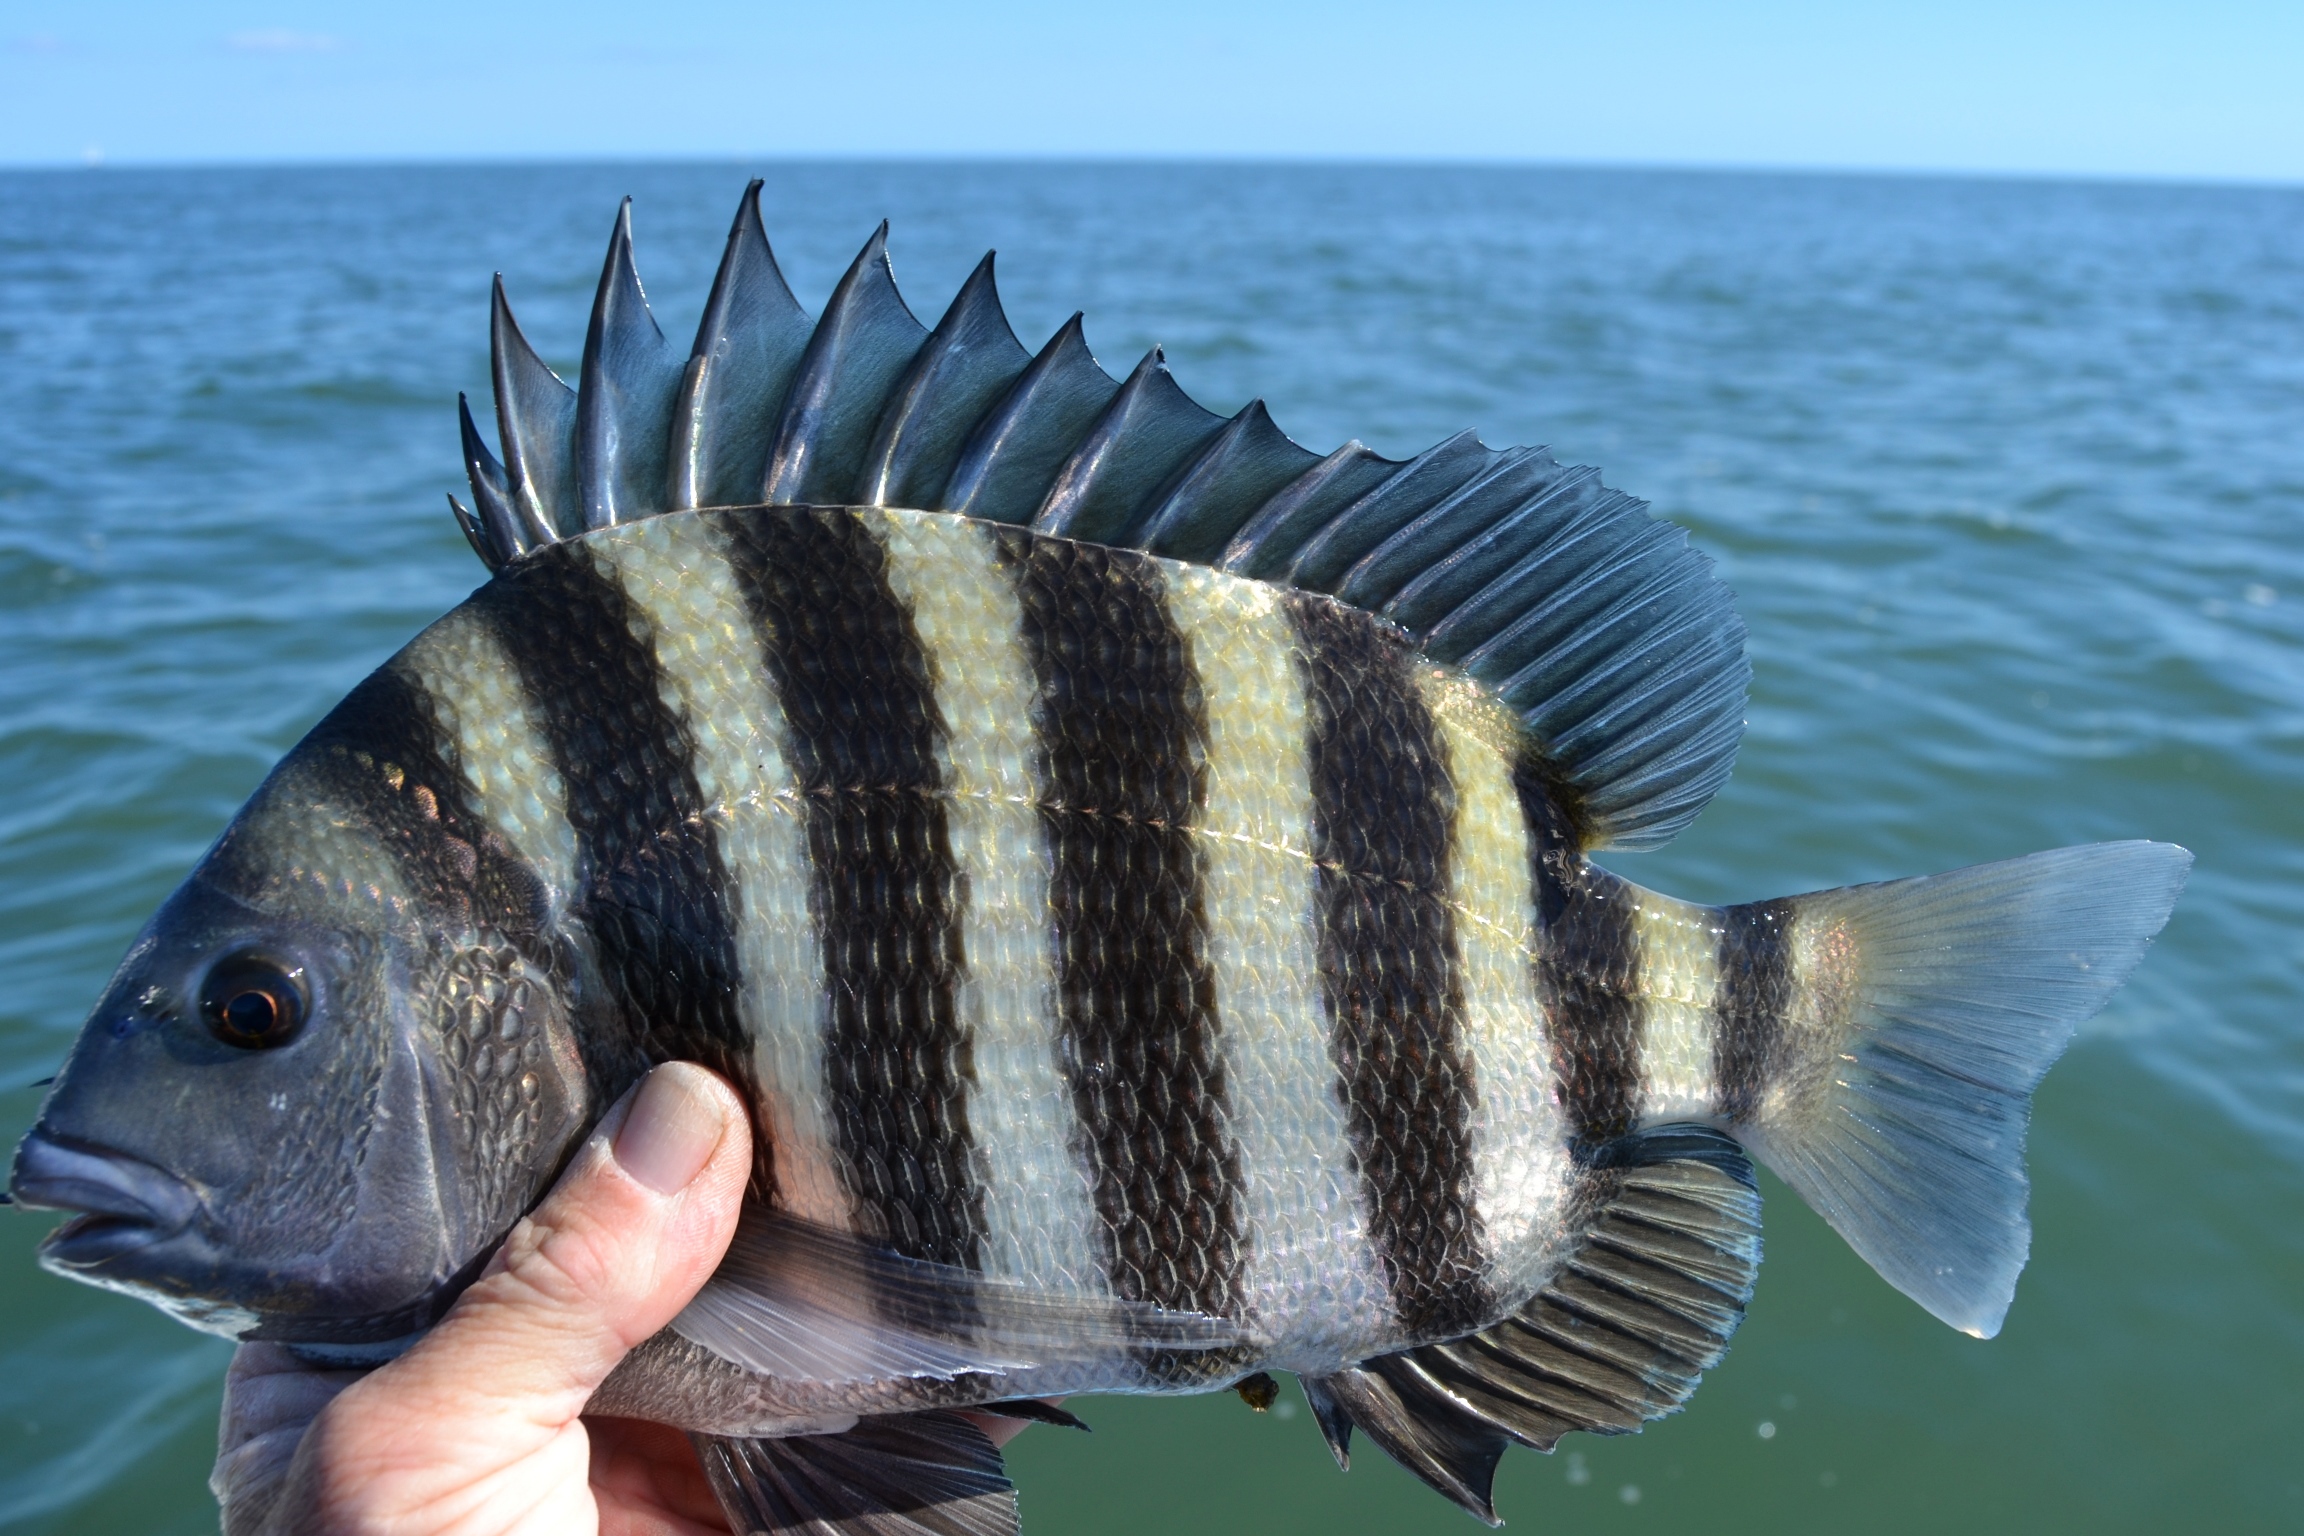 Cute Sheepshead Photo And Wallpaper Pictures